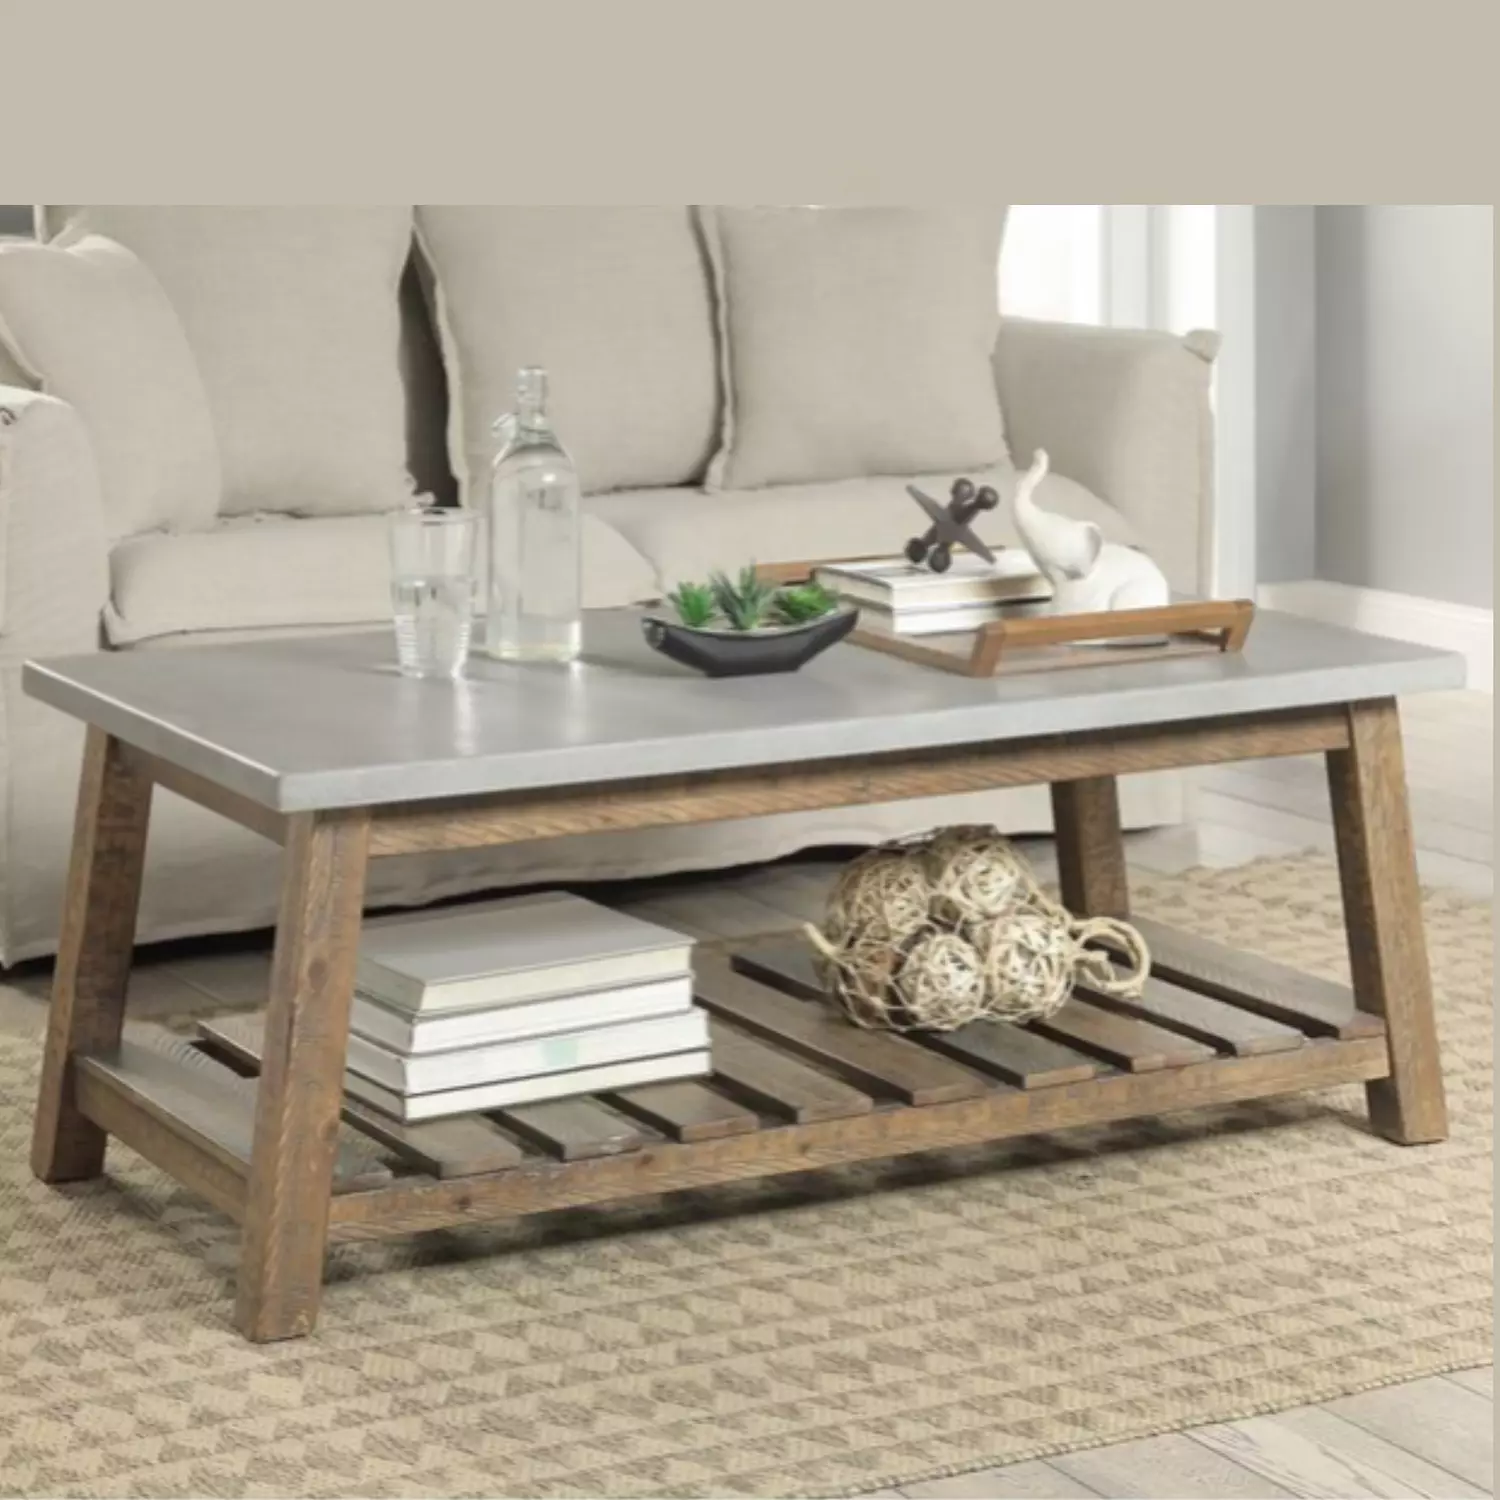 Concry coffee table  hover image